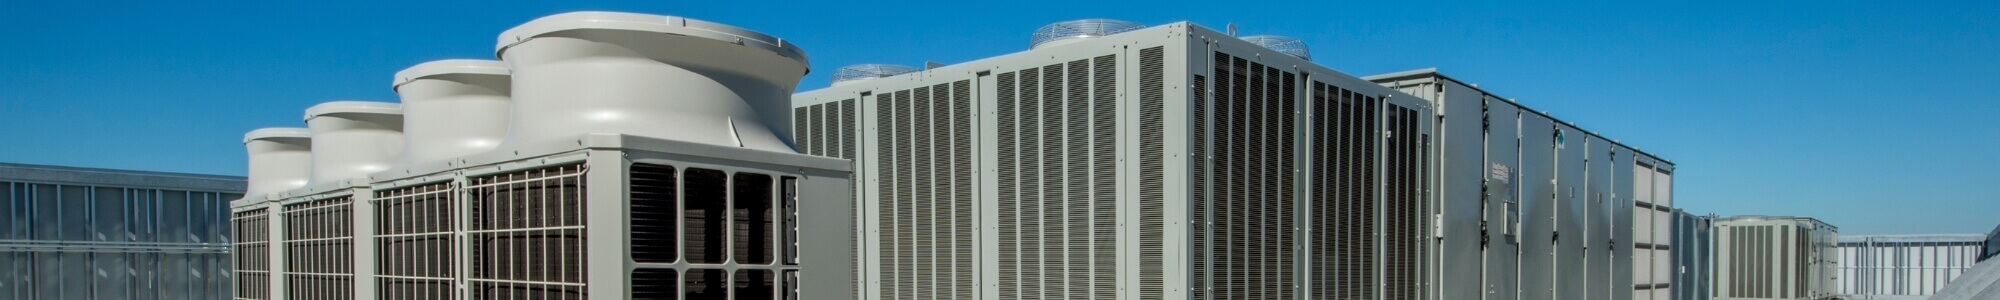 HVAC services in Collingwood